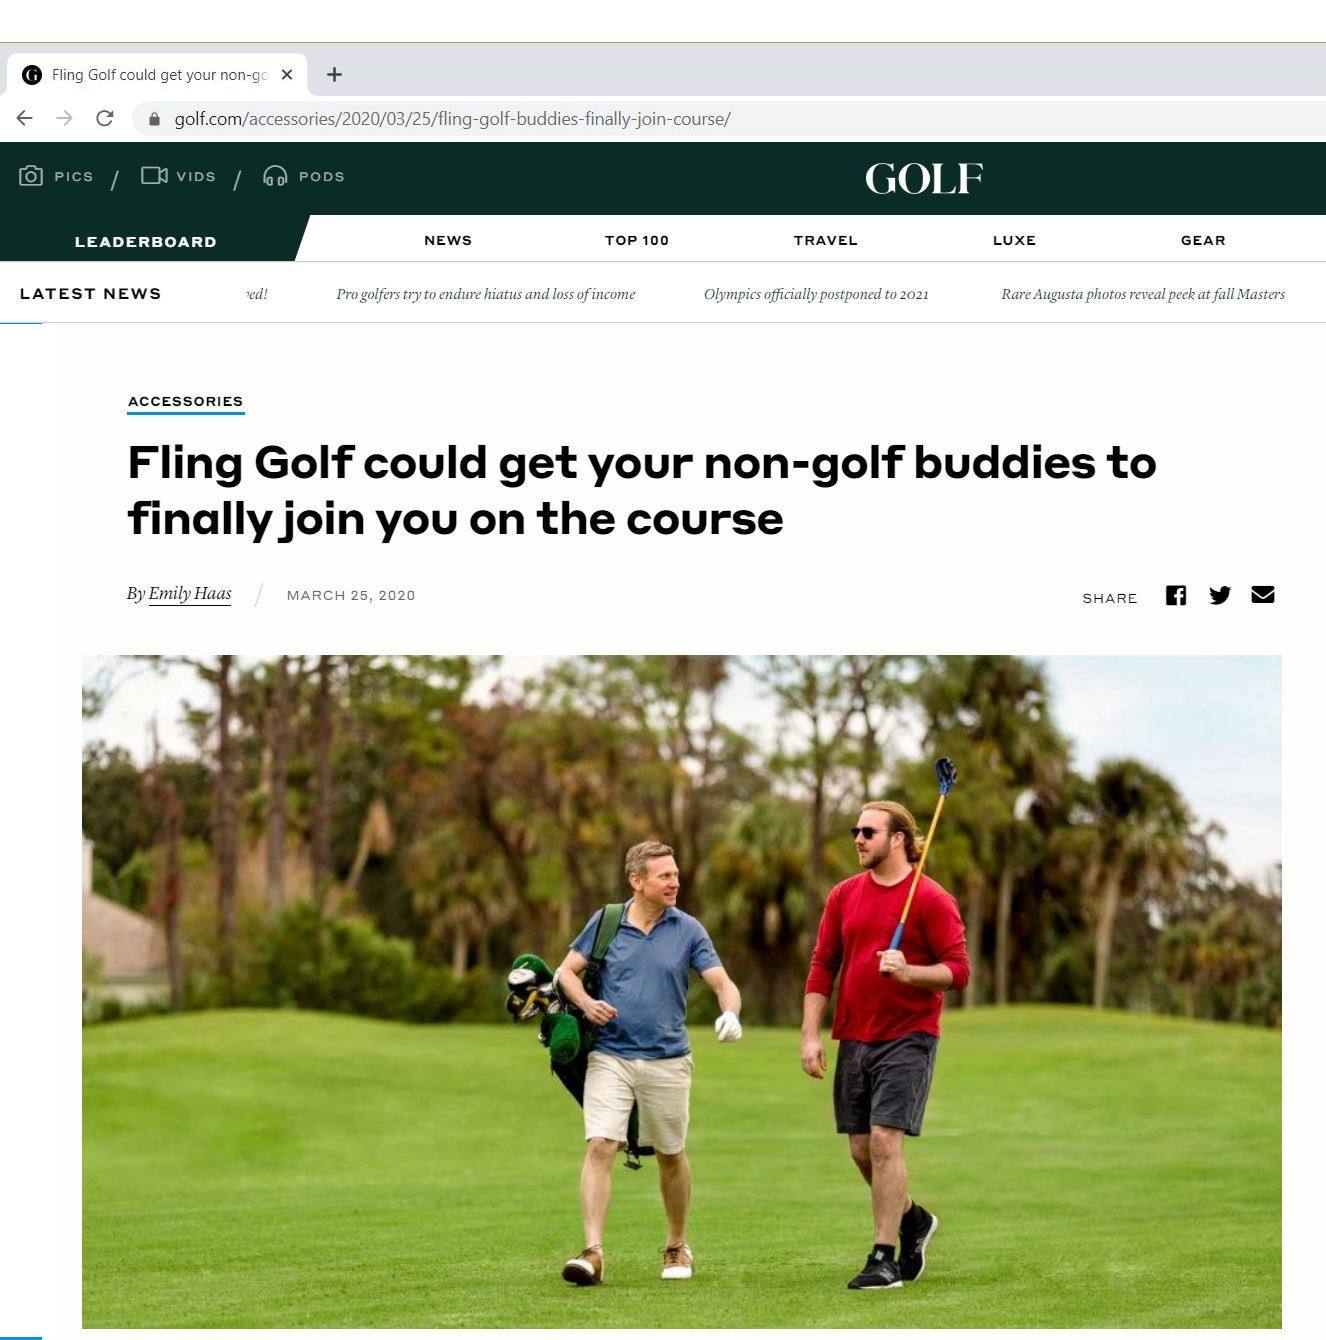 Golf.com: FlingGolf could get your non-golfing buddies on the course with you.